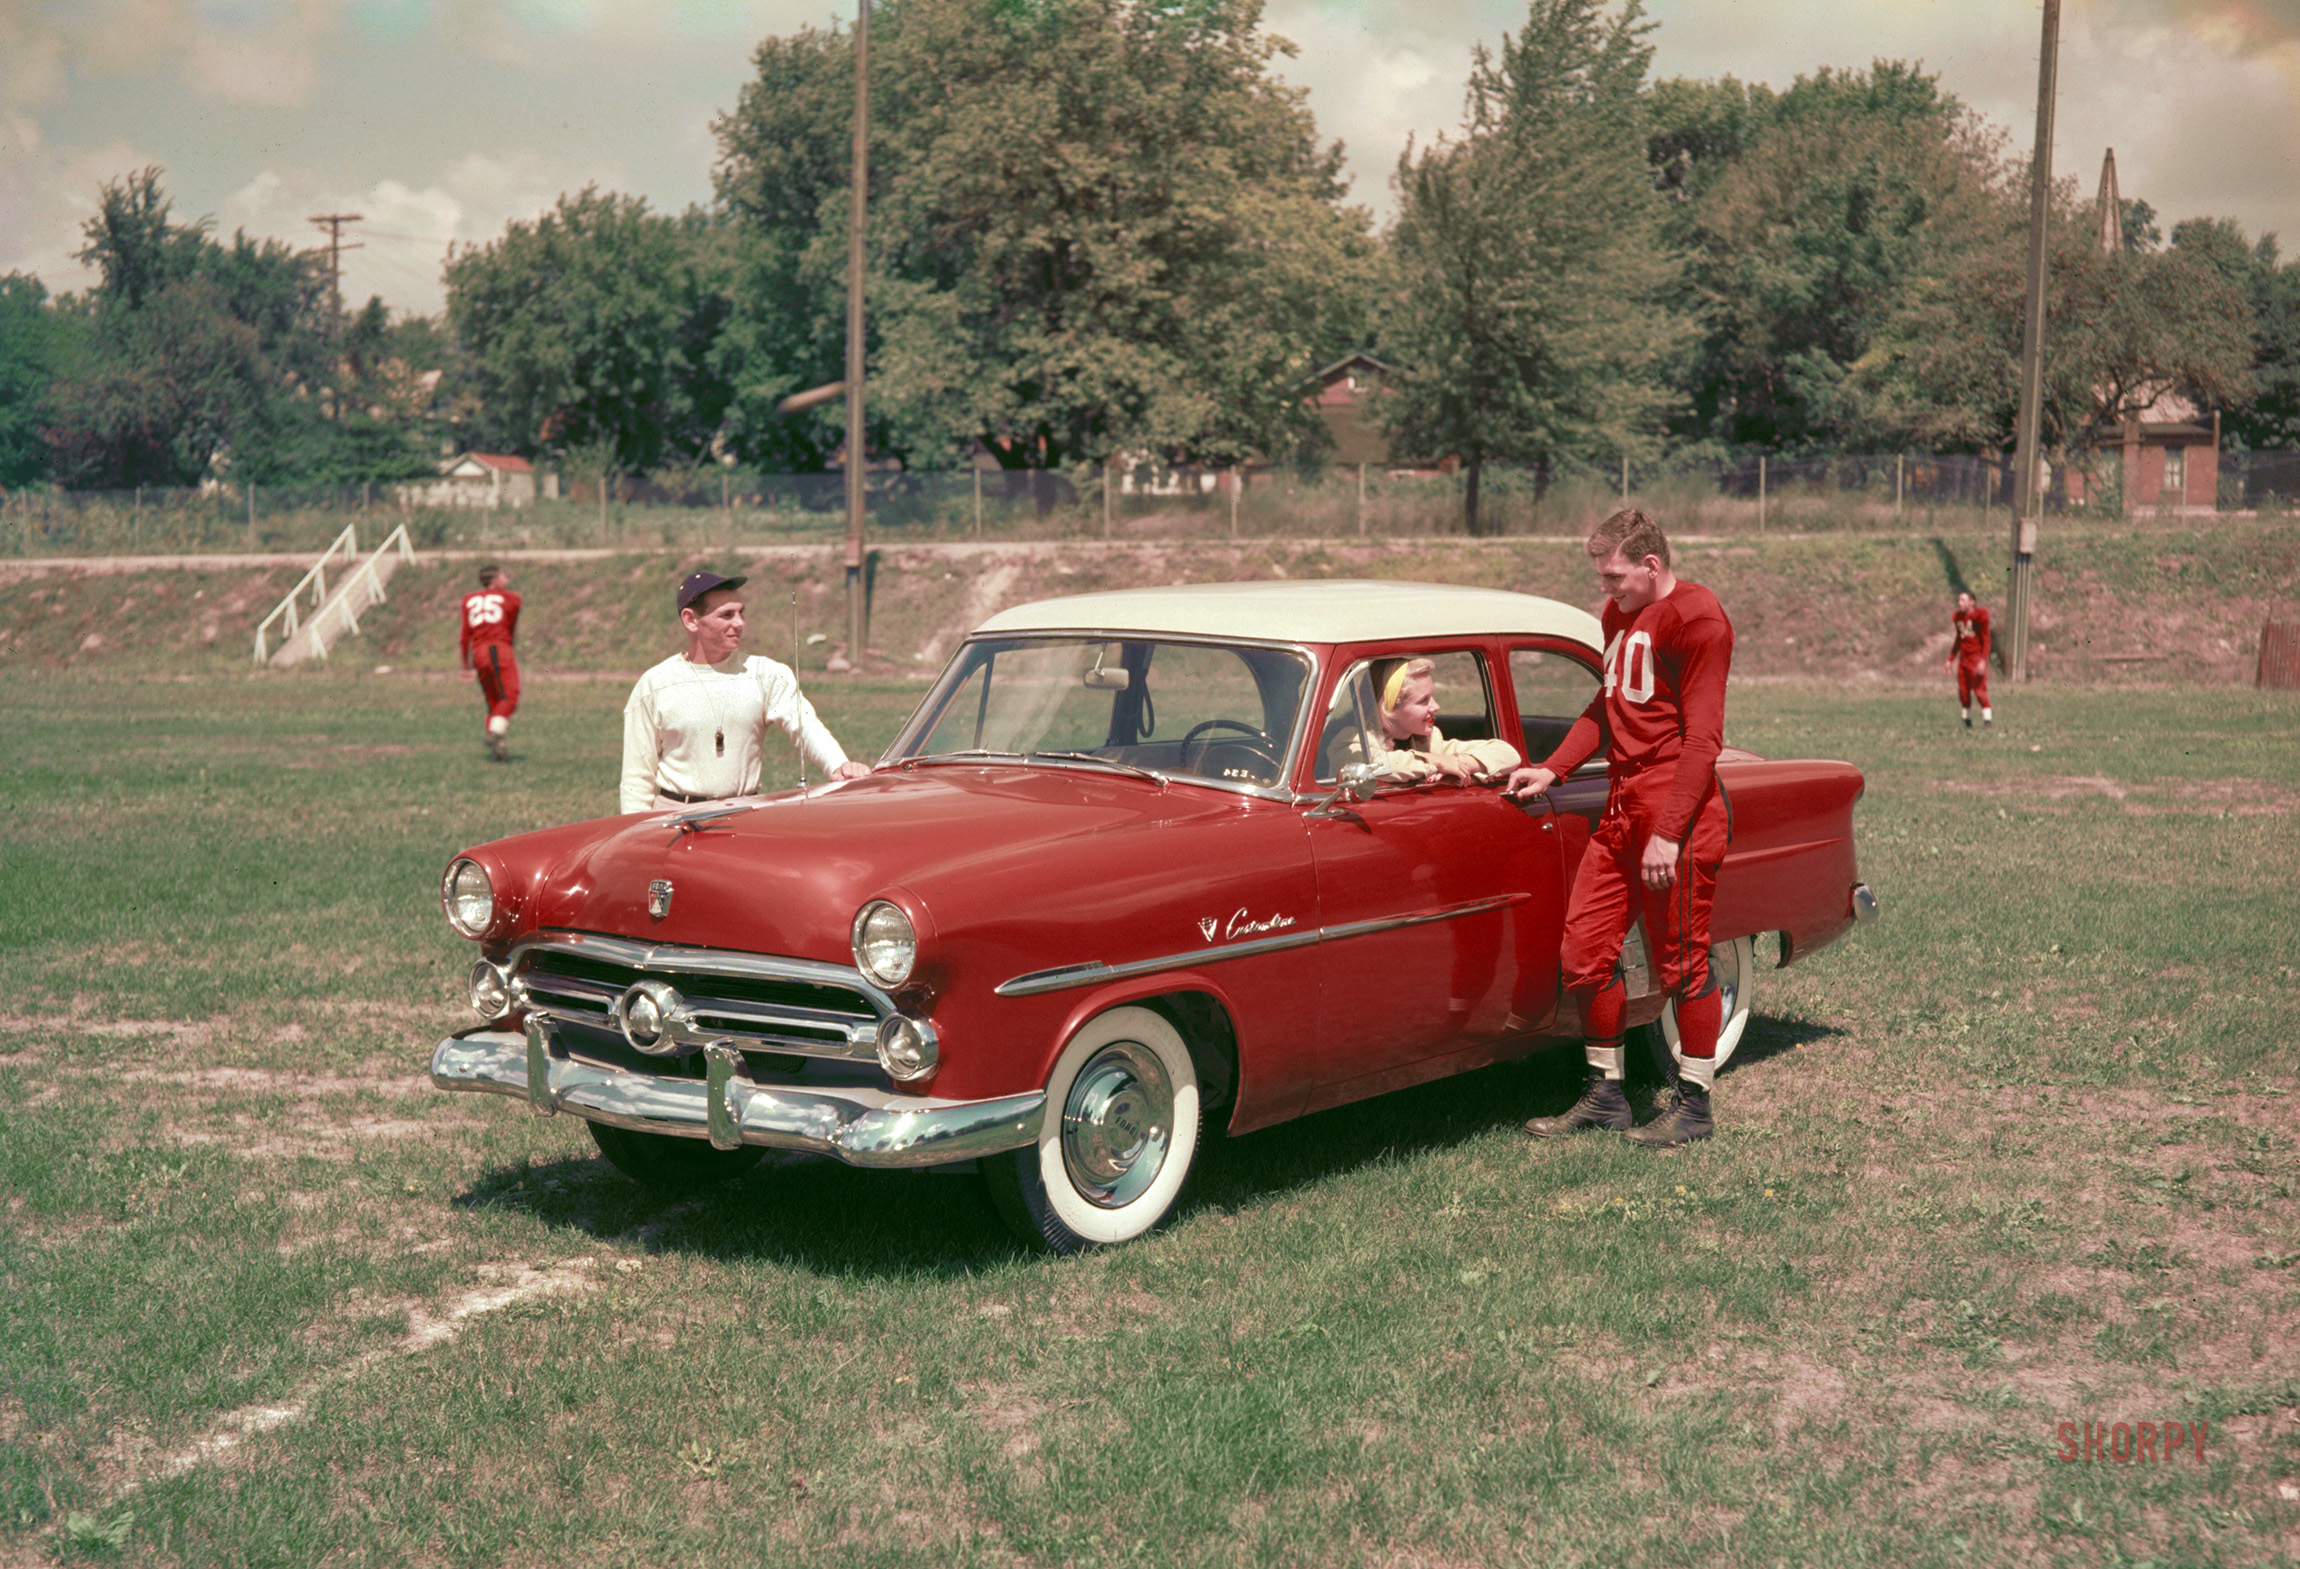 "1952 Ford Customline Tudor Sedan." As opposed to the "Fordor" sedan, which had two Mordors. Color transparency from the Ford Motor Co. photographic archives. View full size.